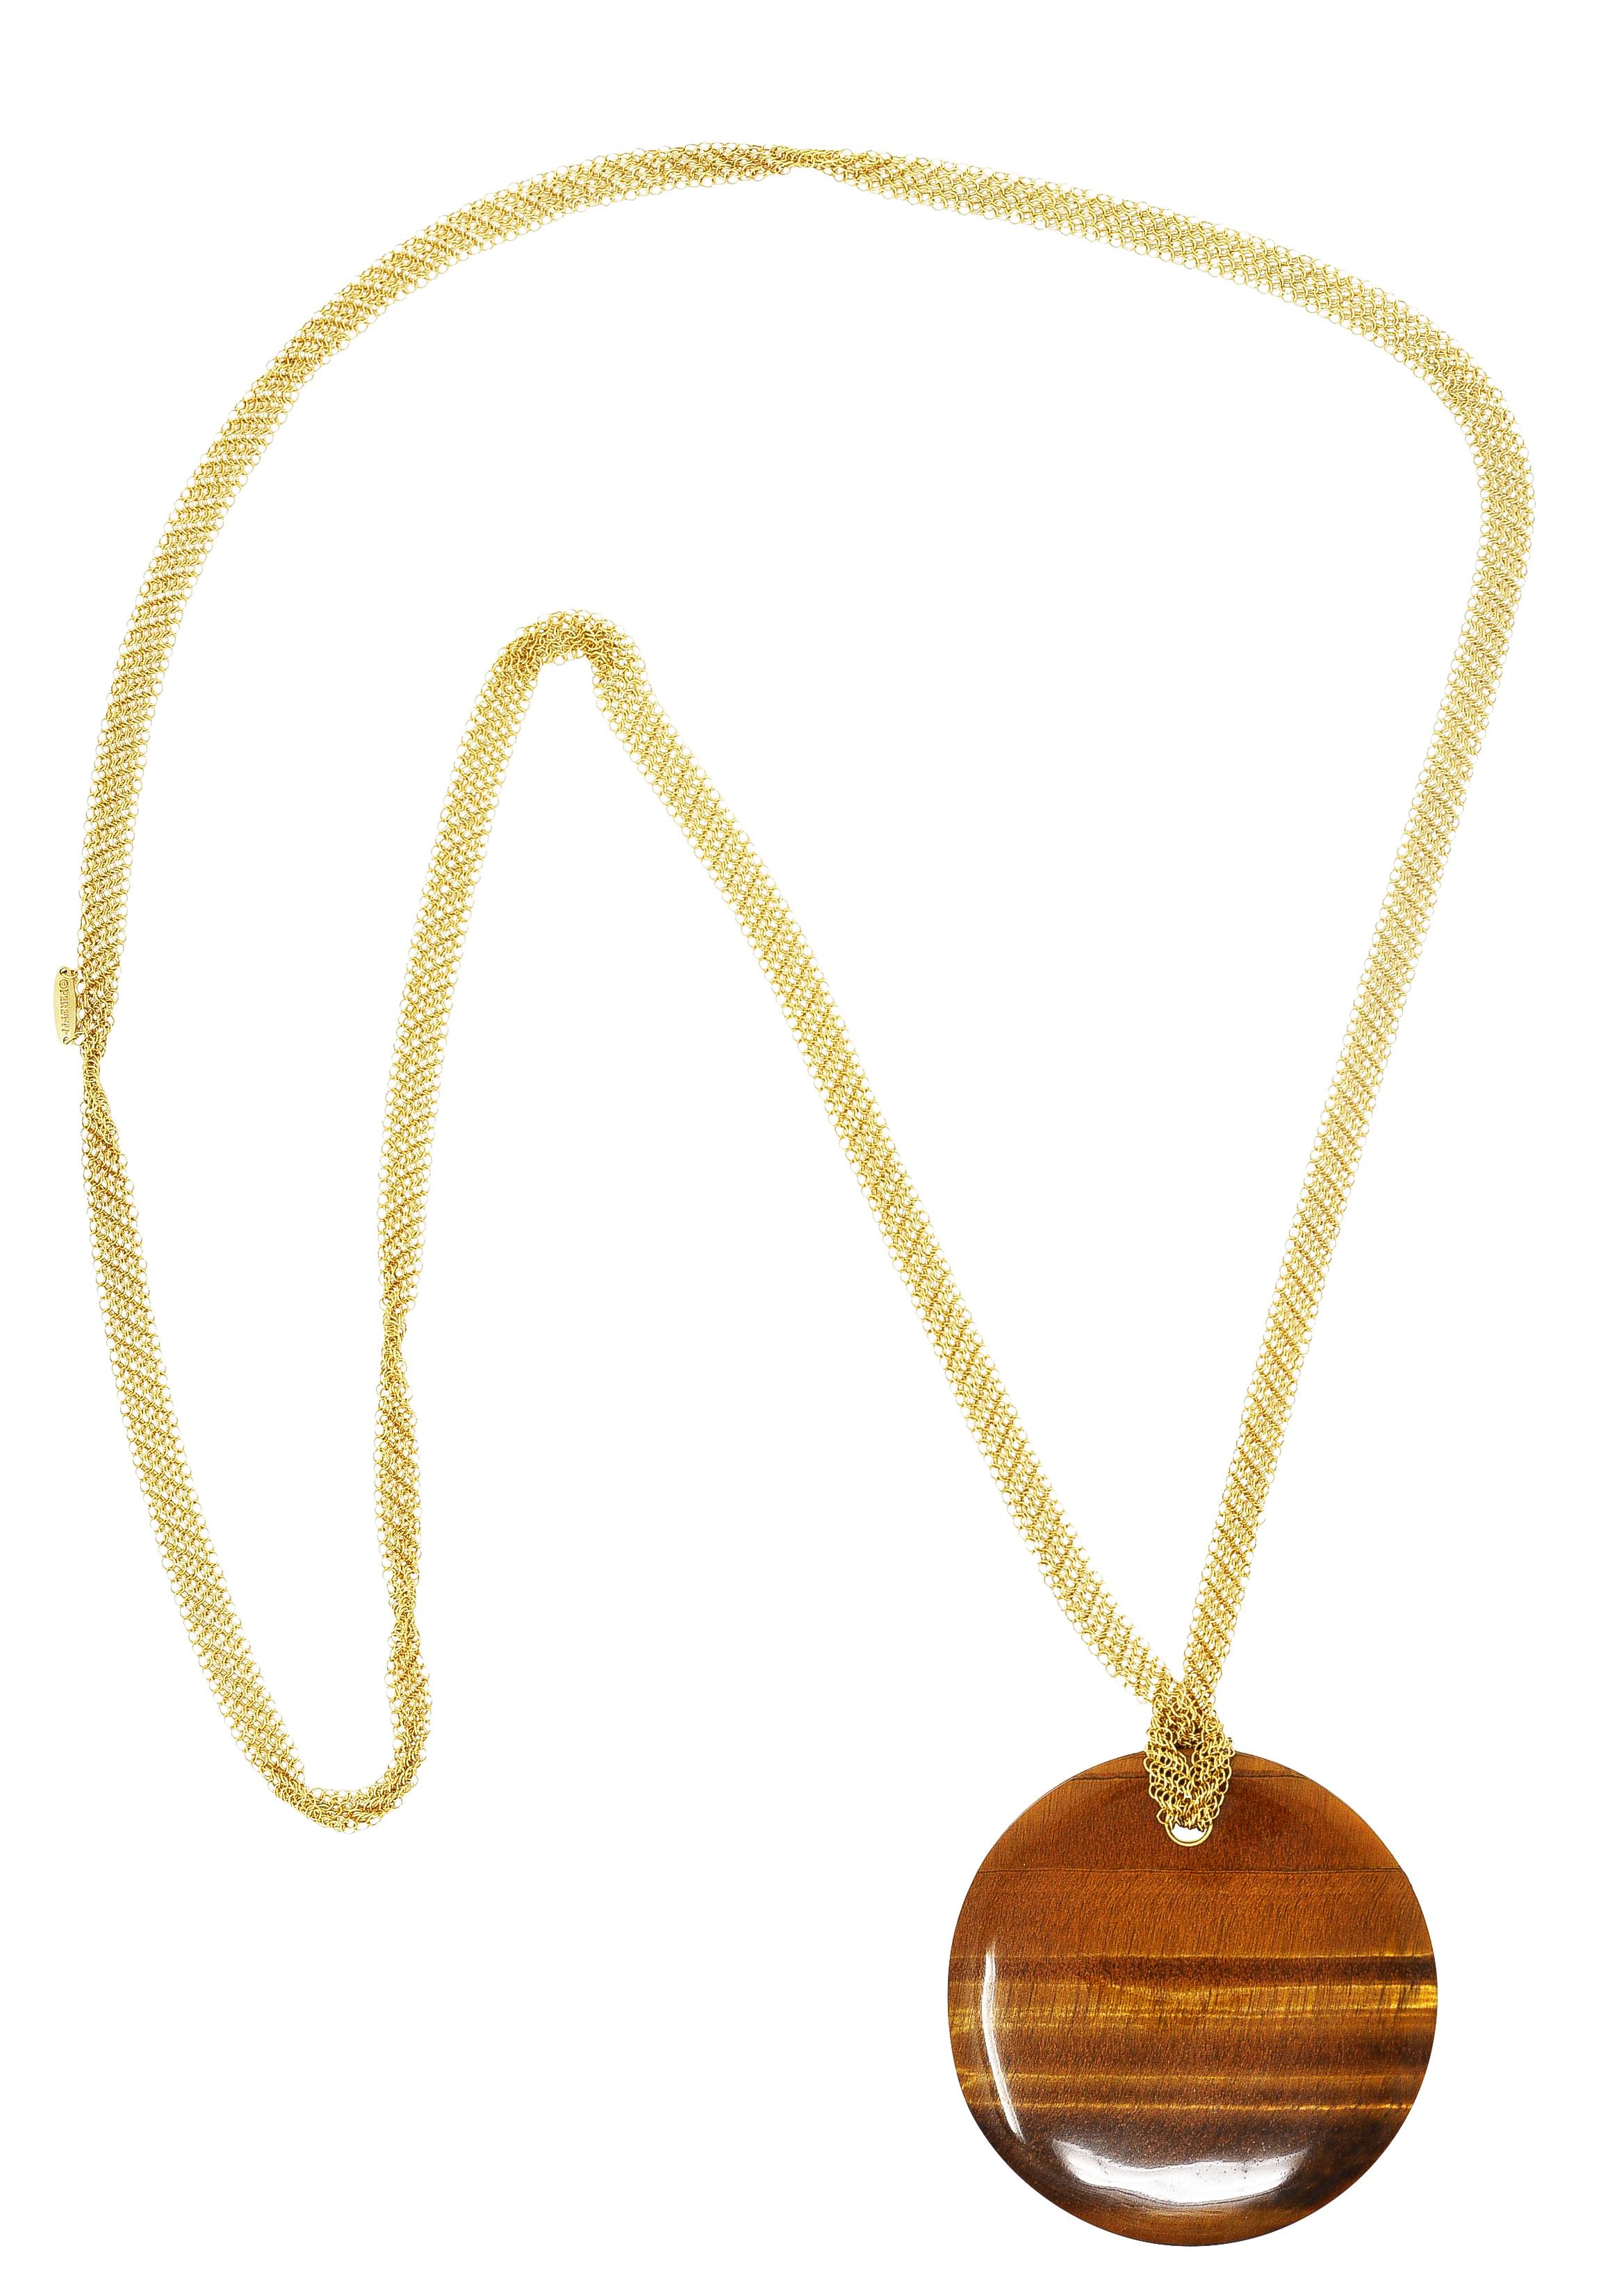 Featuring a substantial 50.0 mm touchstone pendant of tiger's eye quartz

Opaque with brown to yellowish orange banded color while exhibiting strong chatoyancy

Carved as a circle with a slightly concave impression

Suspending from a gold mesh